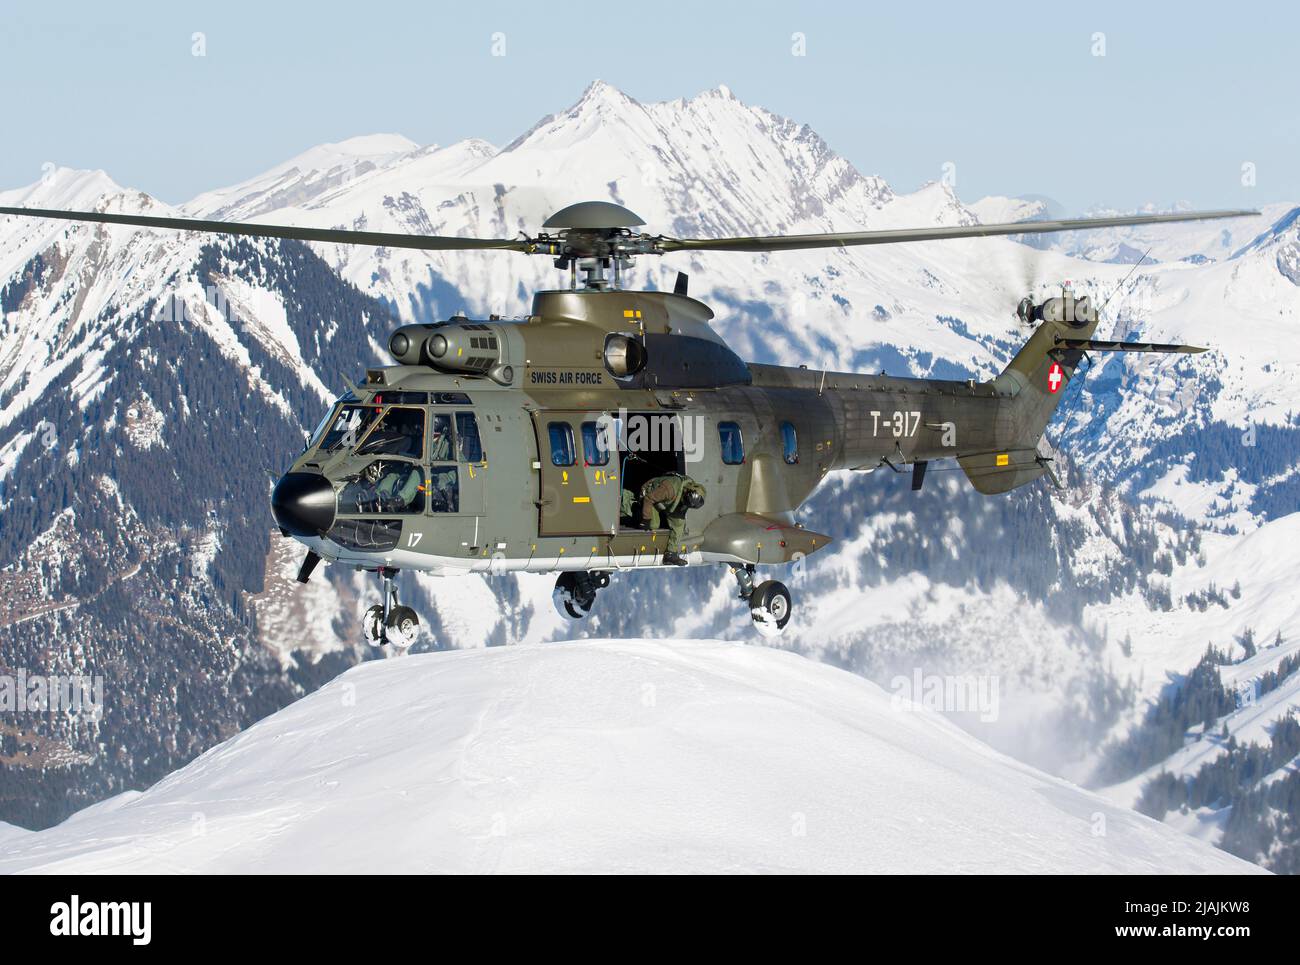 A Swiss Air Force AS332 Super Puma helicopter preparing to land on a snowy peak in the Swiss Alps. Stock Photo